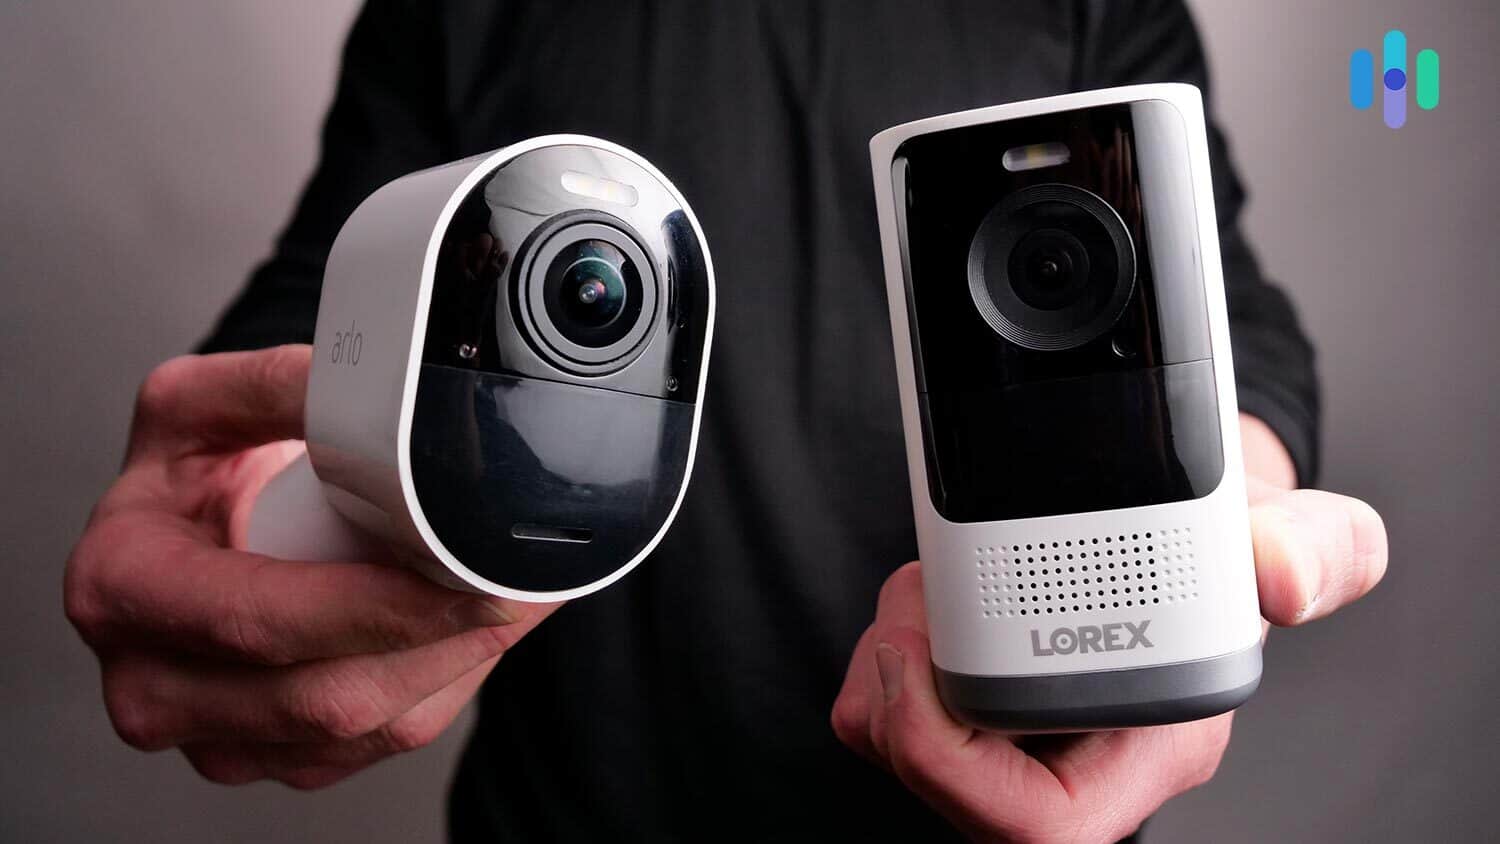 Side-by-side comparison of Arlo and Lorex cameras